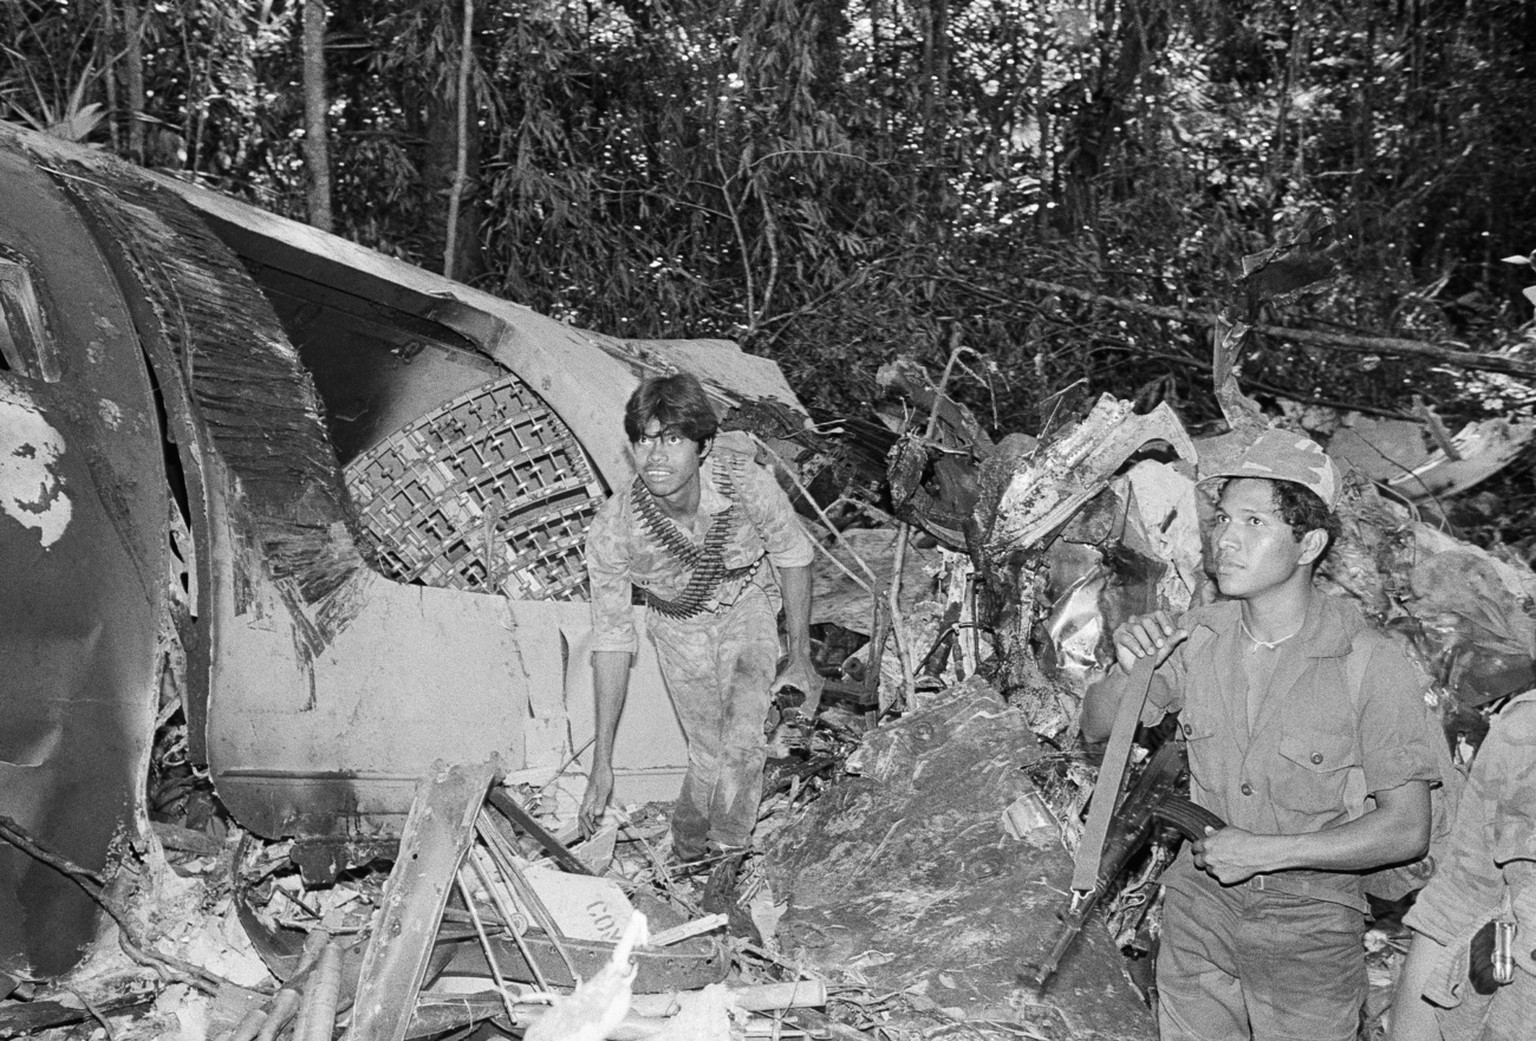 Wreckage of the rebel supply plane shot down on Saturday, Jan. 24, 1988 over Nicaragua lies in a jungle-covered area near the village of El Arenla. The plane was shot down by Sandinista forces after i ...